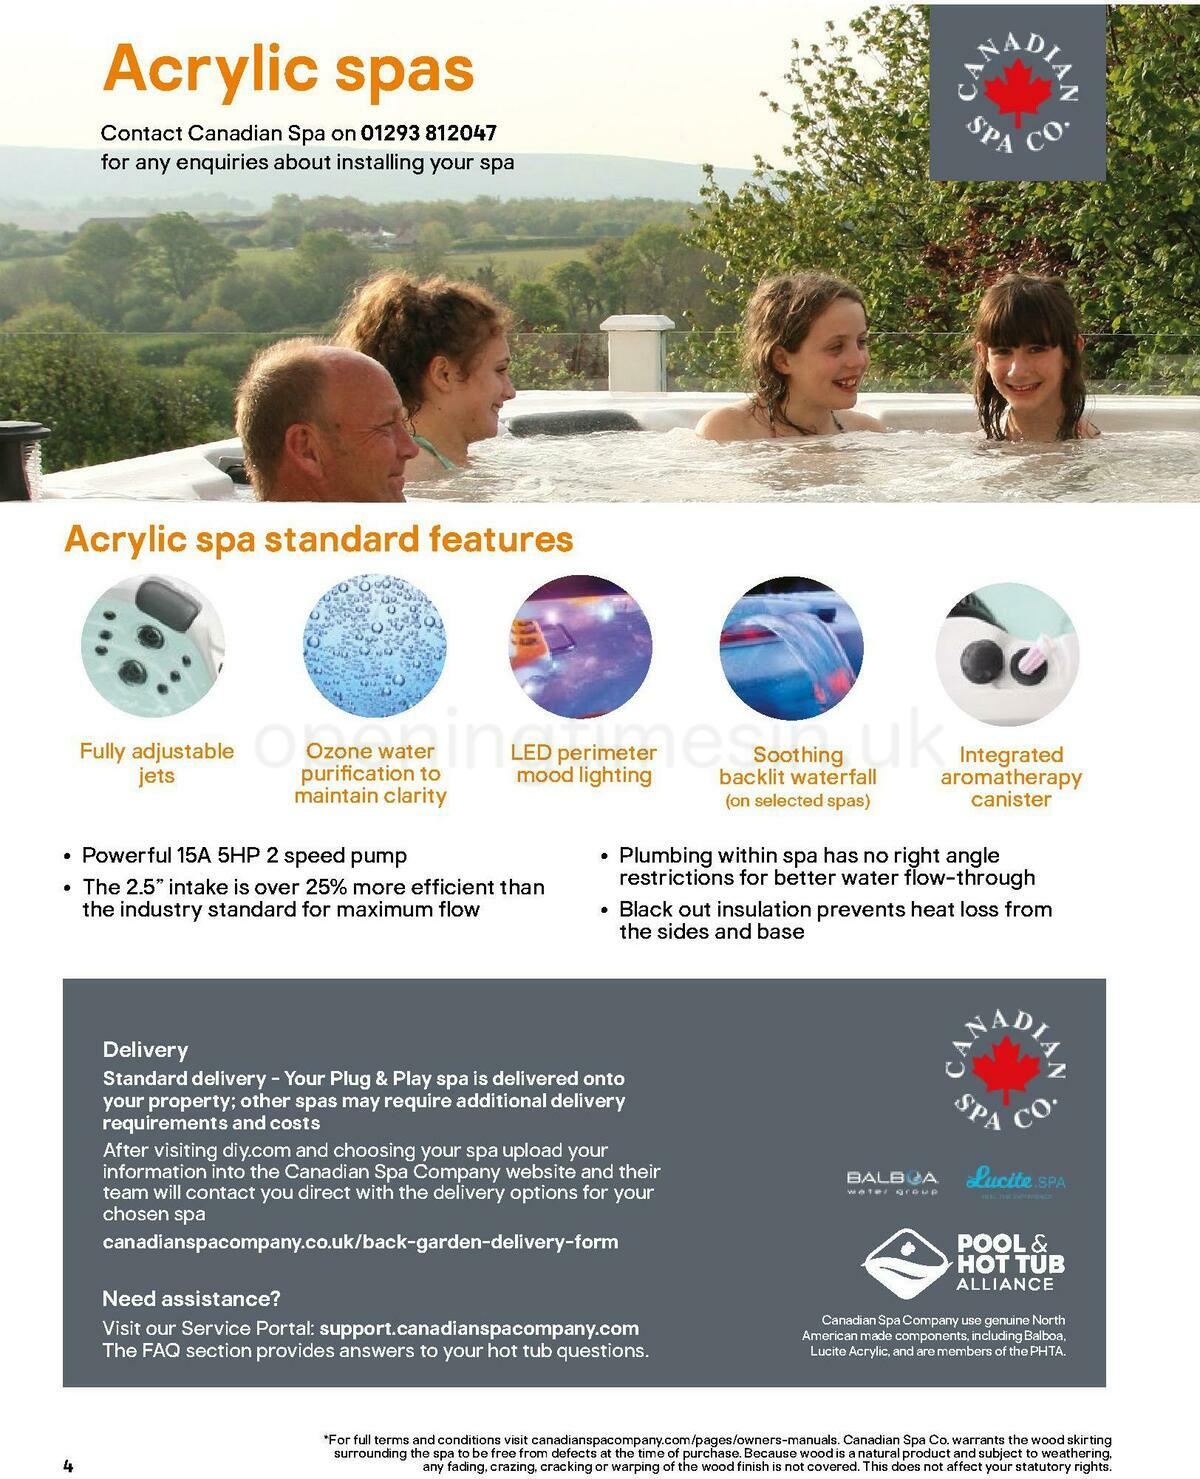 B&Q Hot Tub & Spa Collections Offers from 1 March